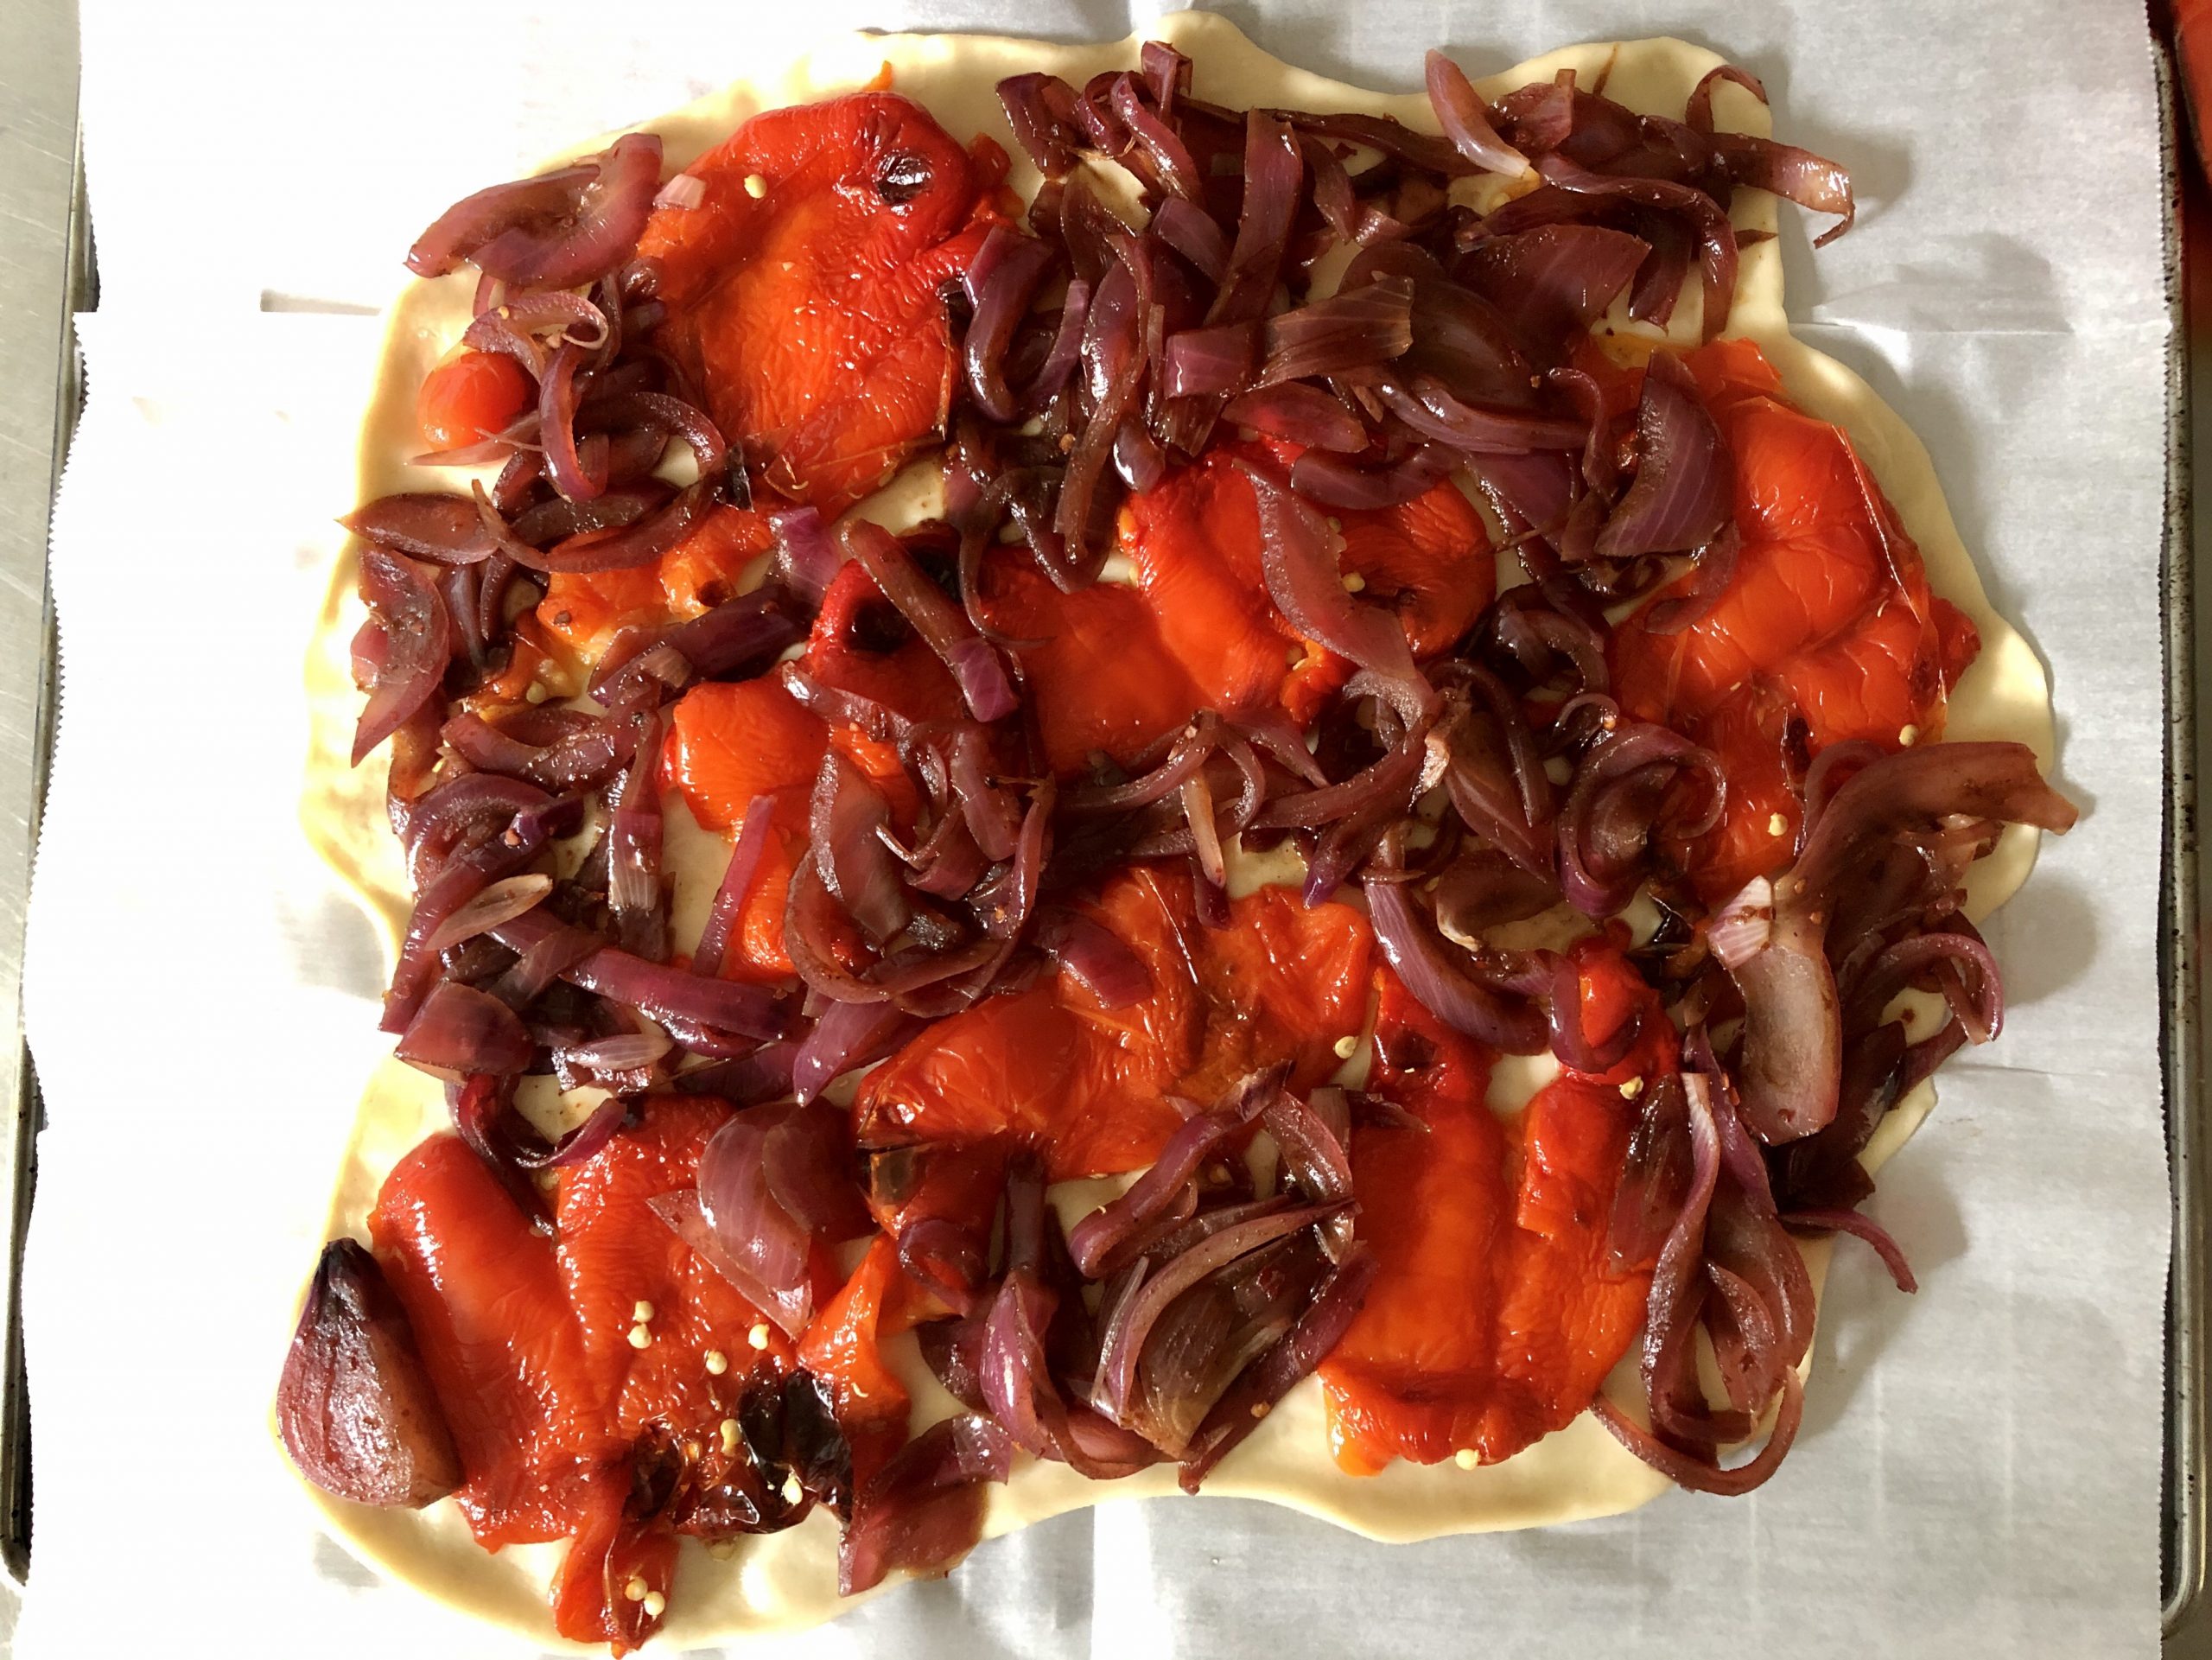 Galette with roasted red peppers, caramelized onions and goat cheese